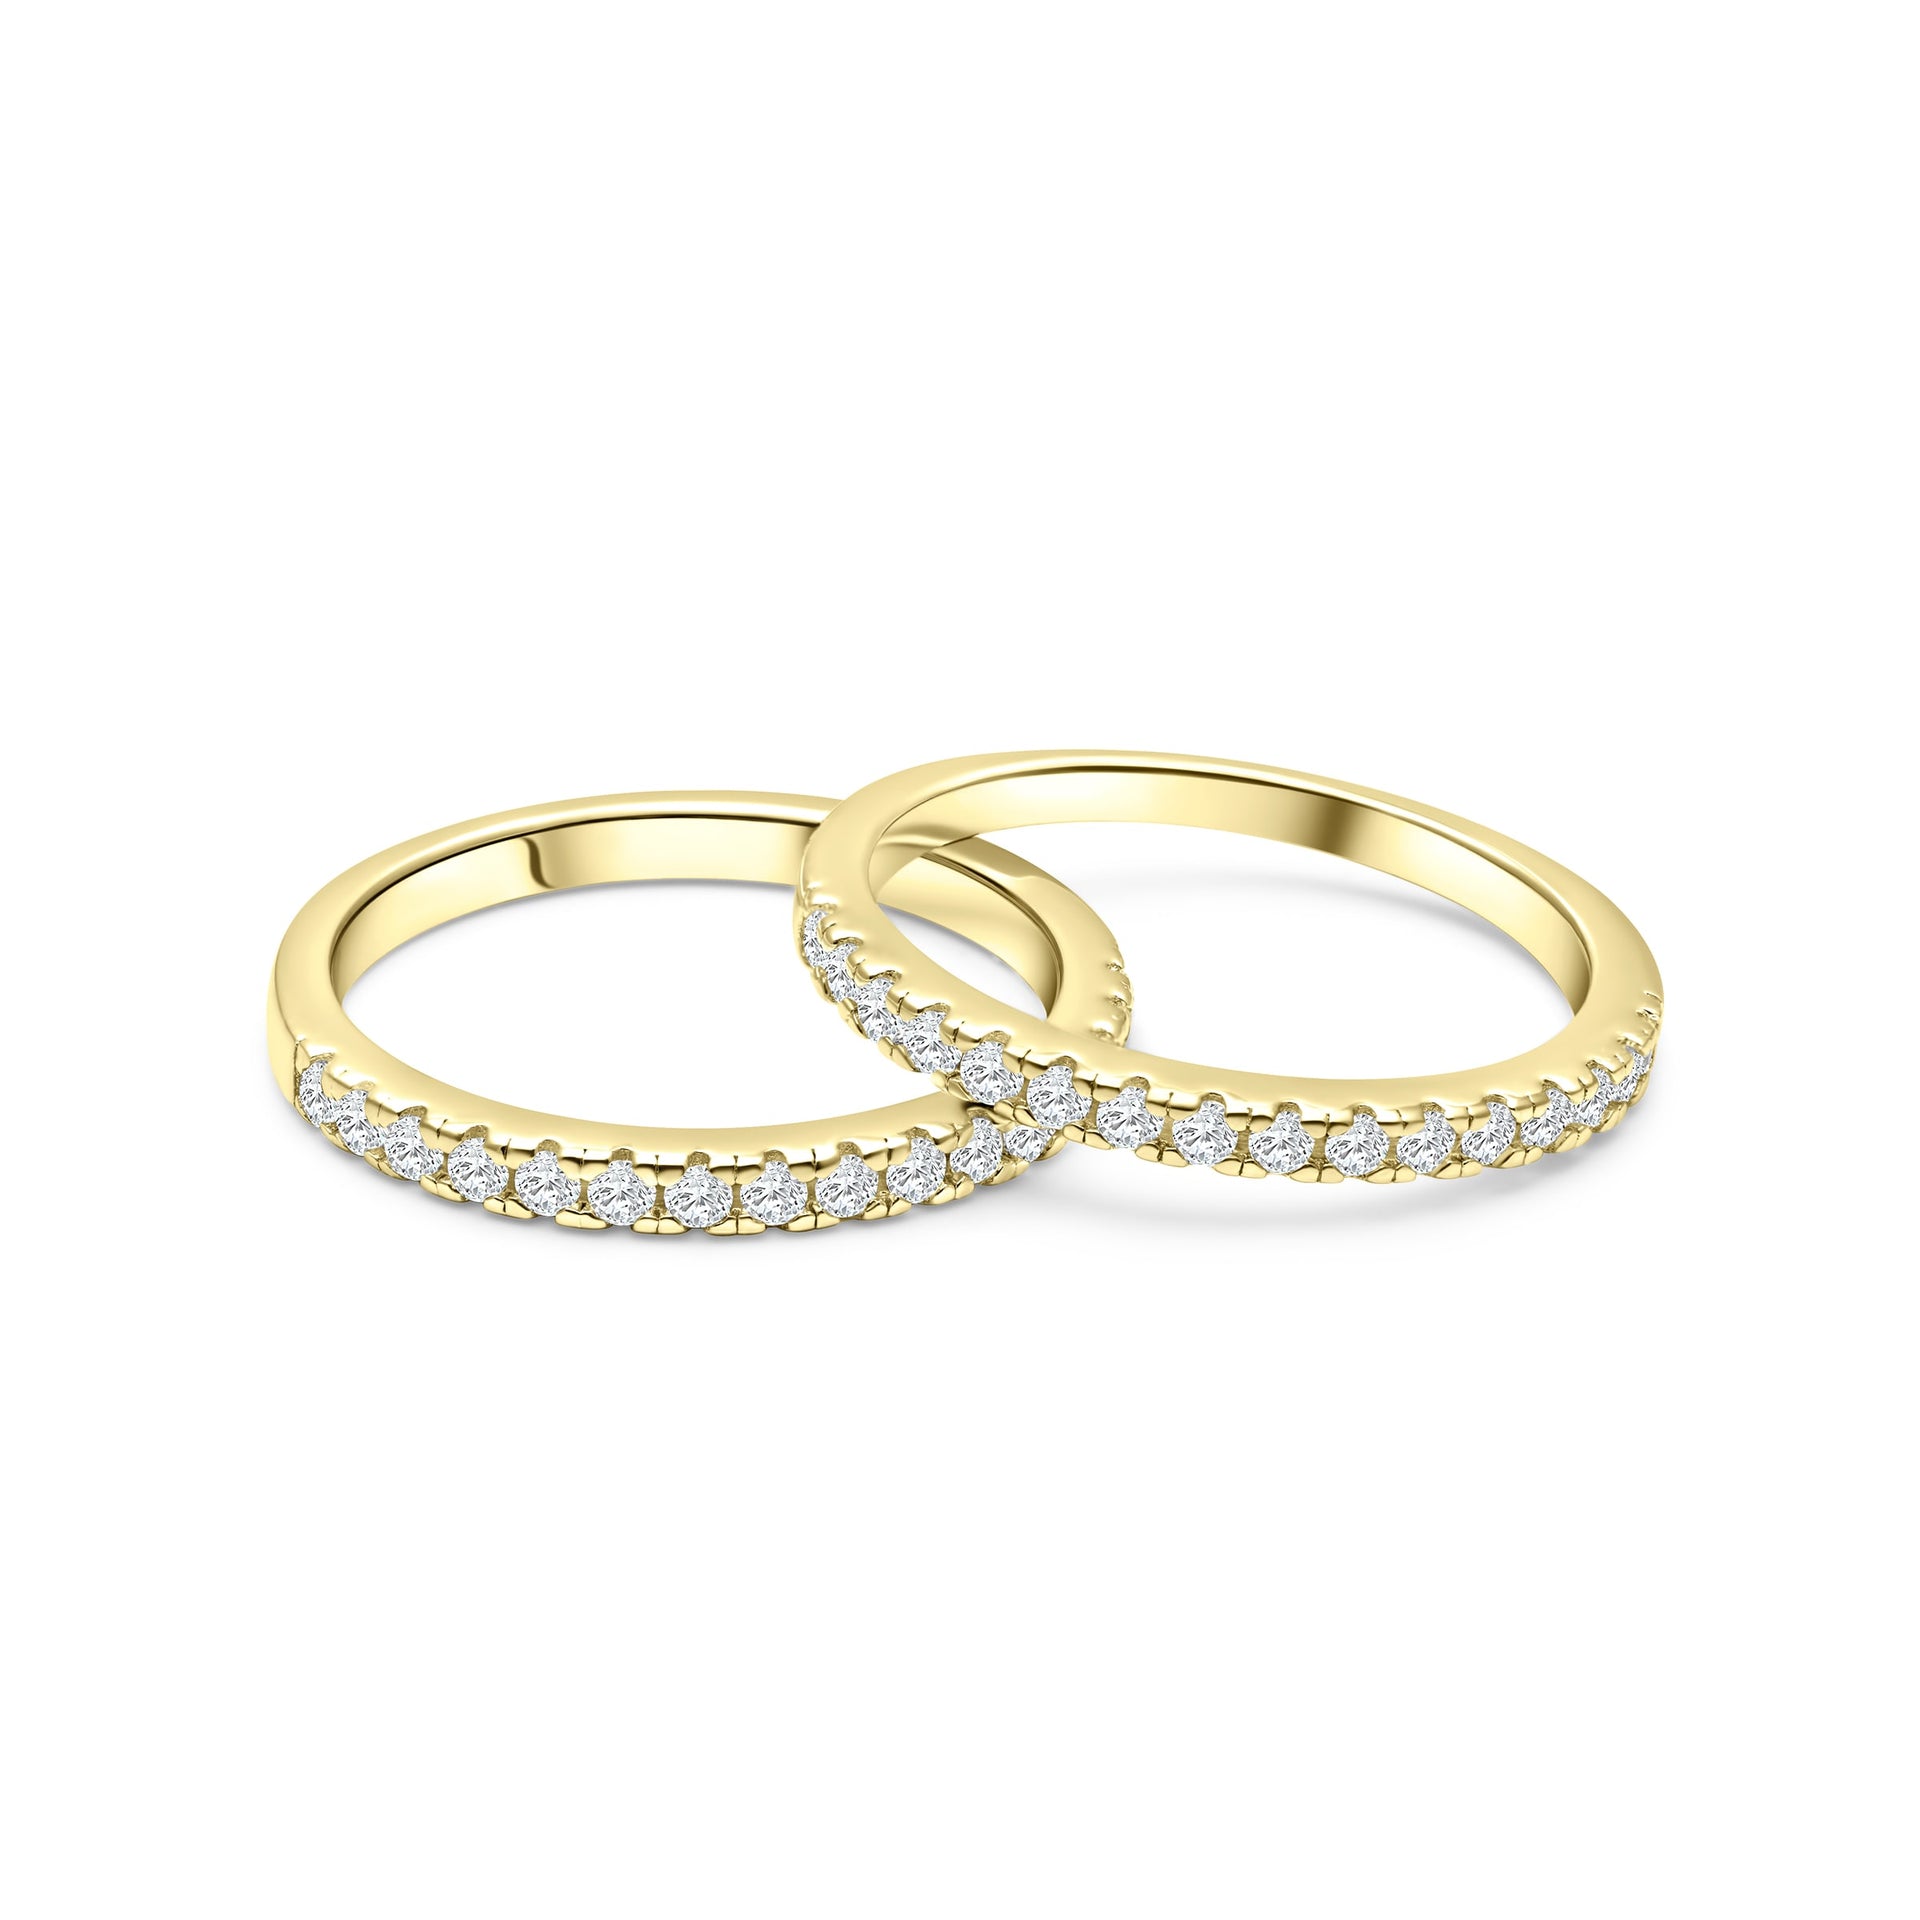 two gorgeous desire engagement rings shown in a duo gold stack